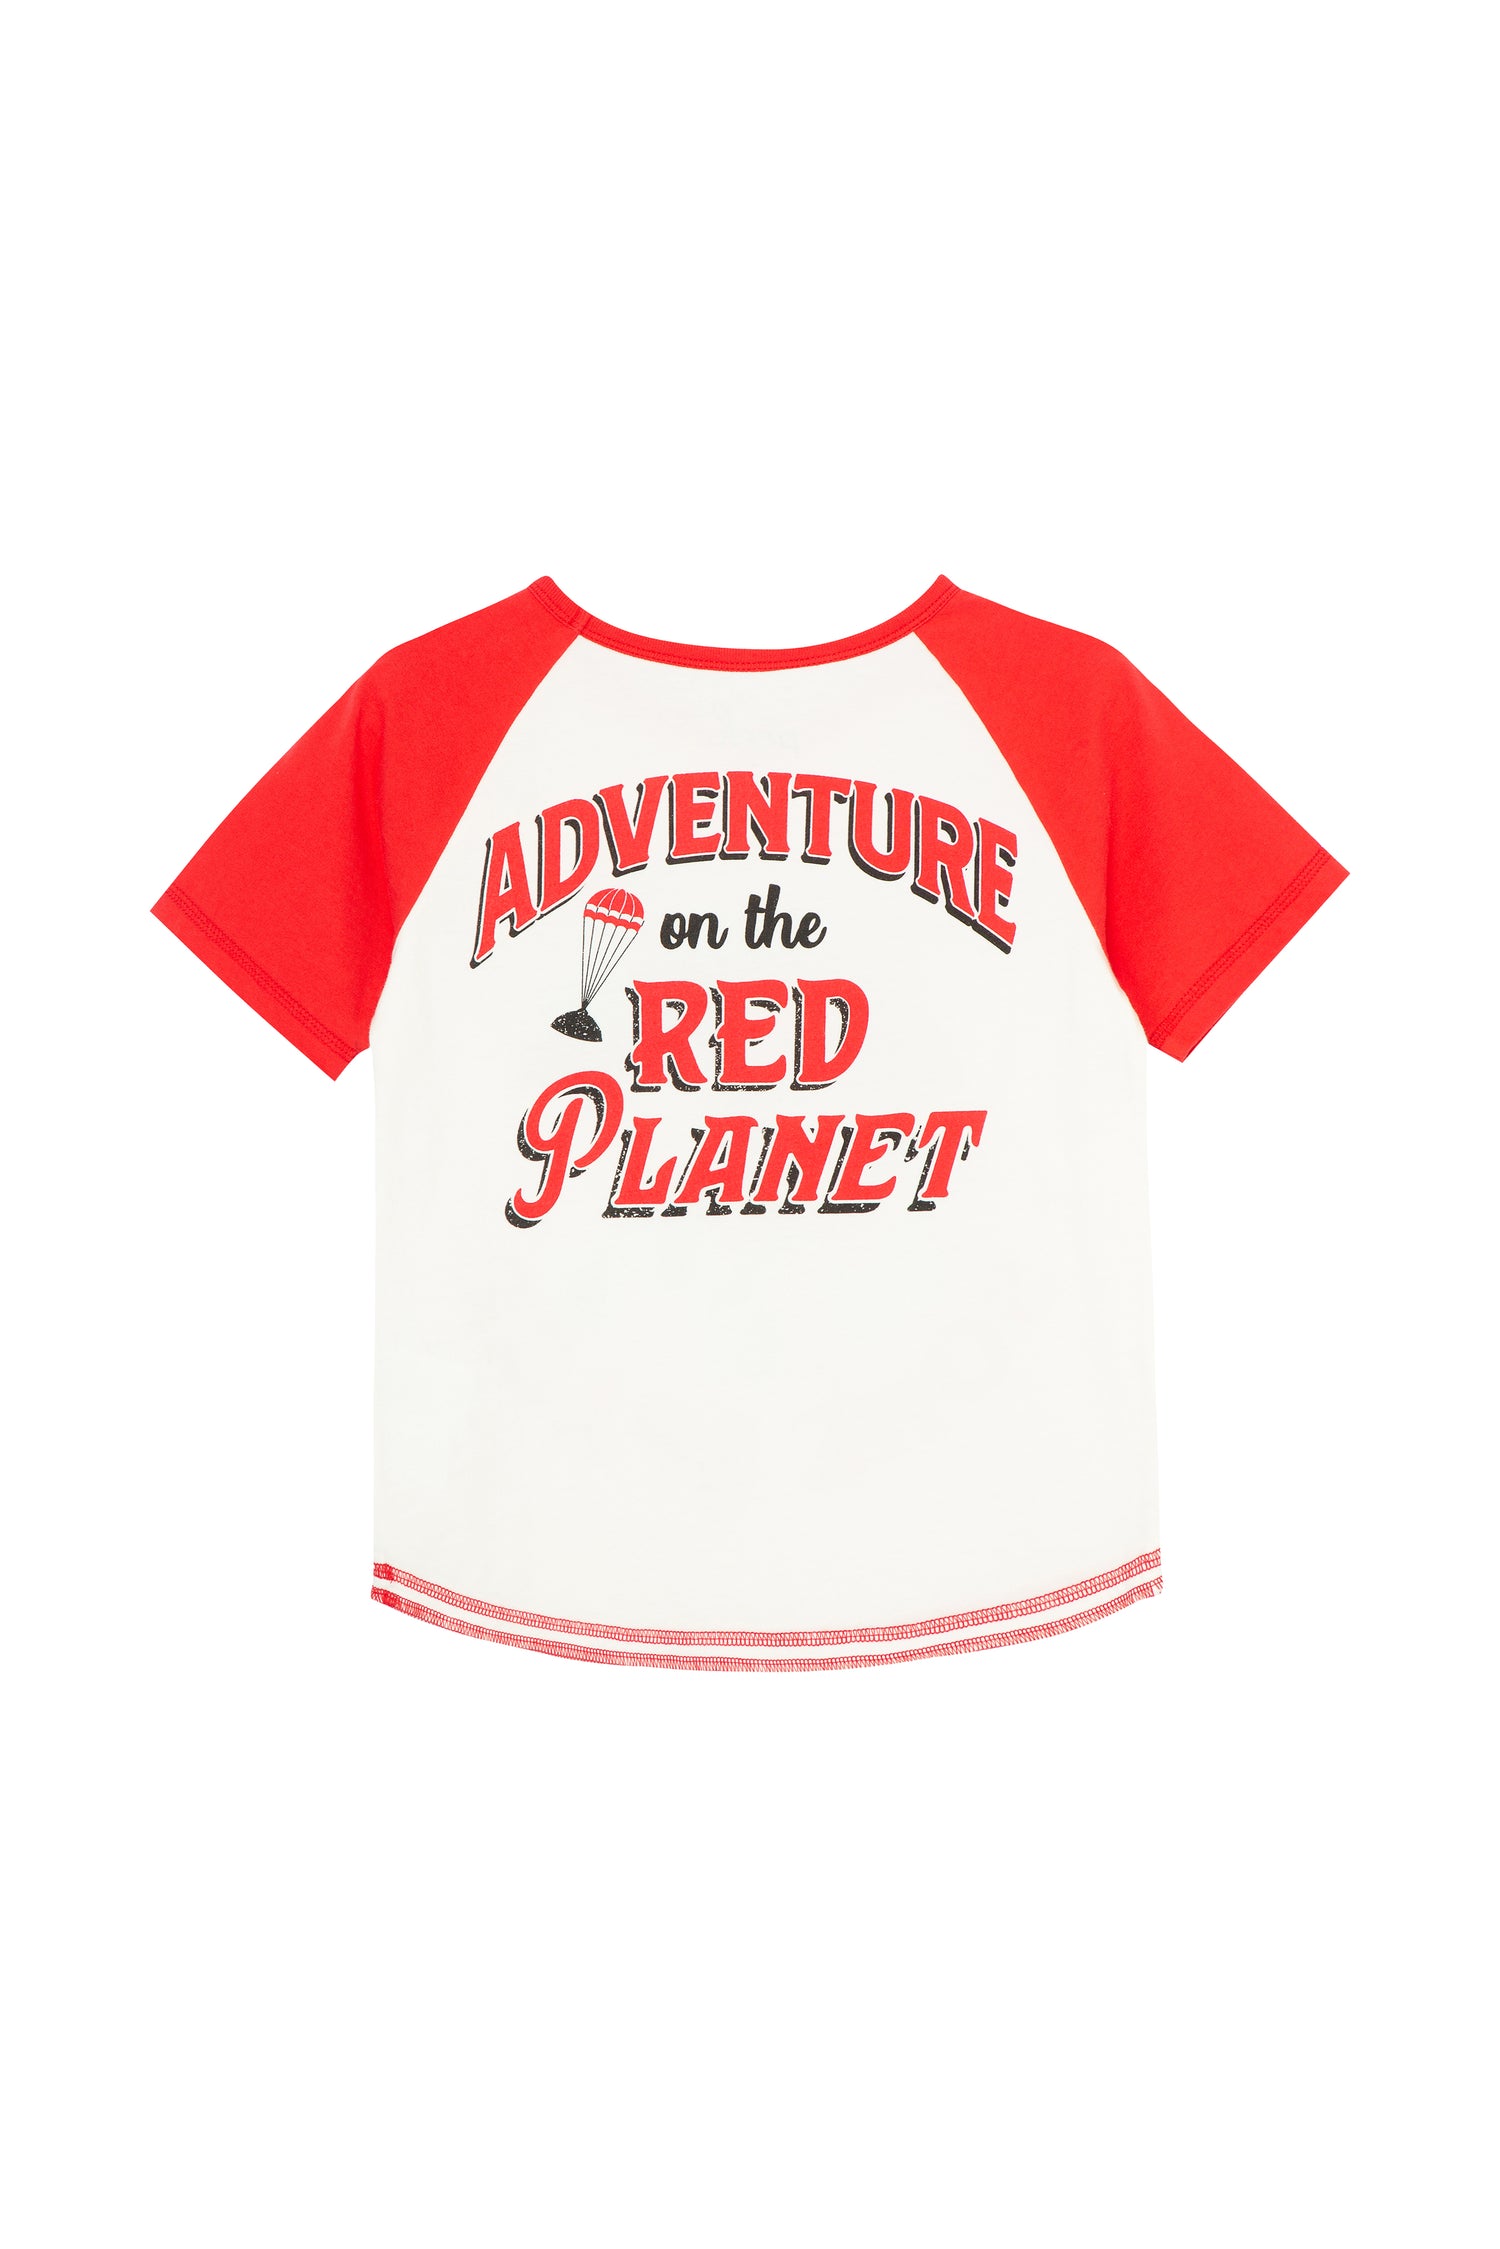 BACK OF RED AND WHITE RAGLAN T-SHIRT WITH "ADVENTURE ON THE RED PLANET"